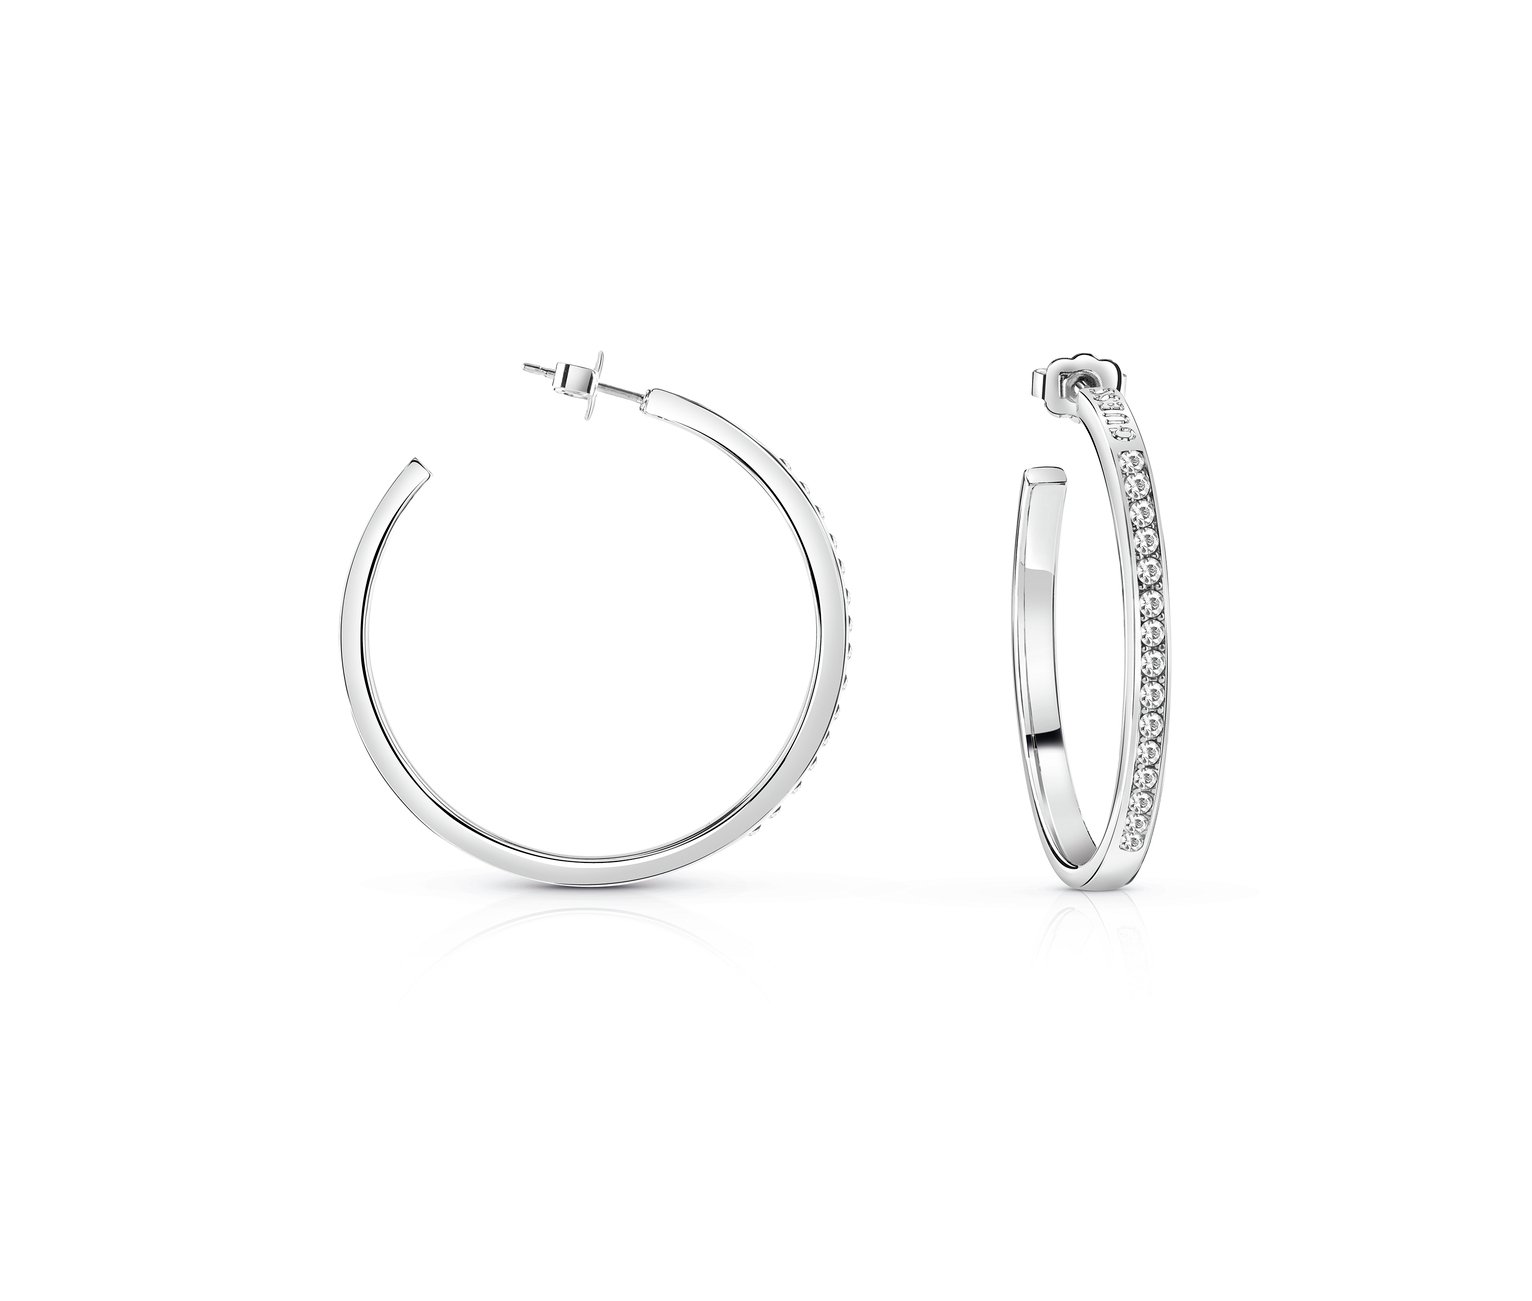 Guess White Swarovski Pave Silver Coloured Hoop Earrings